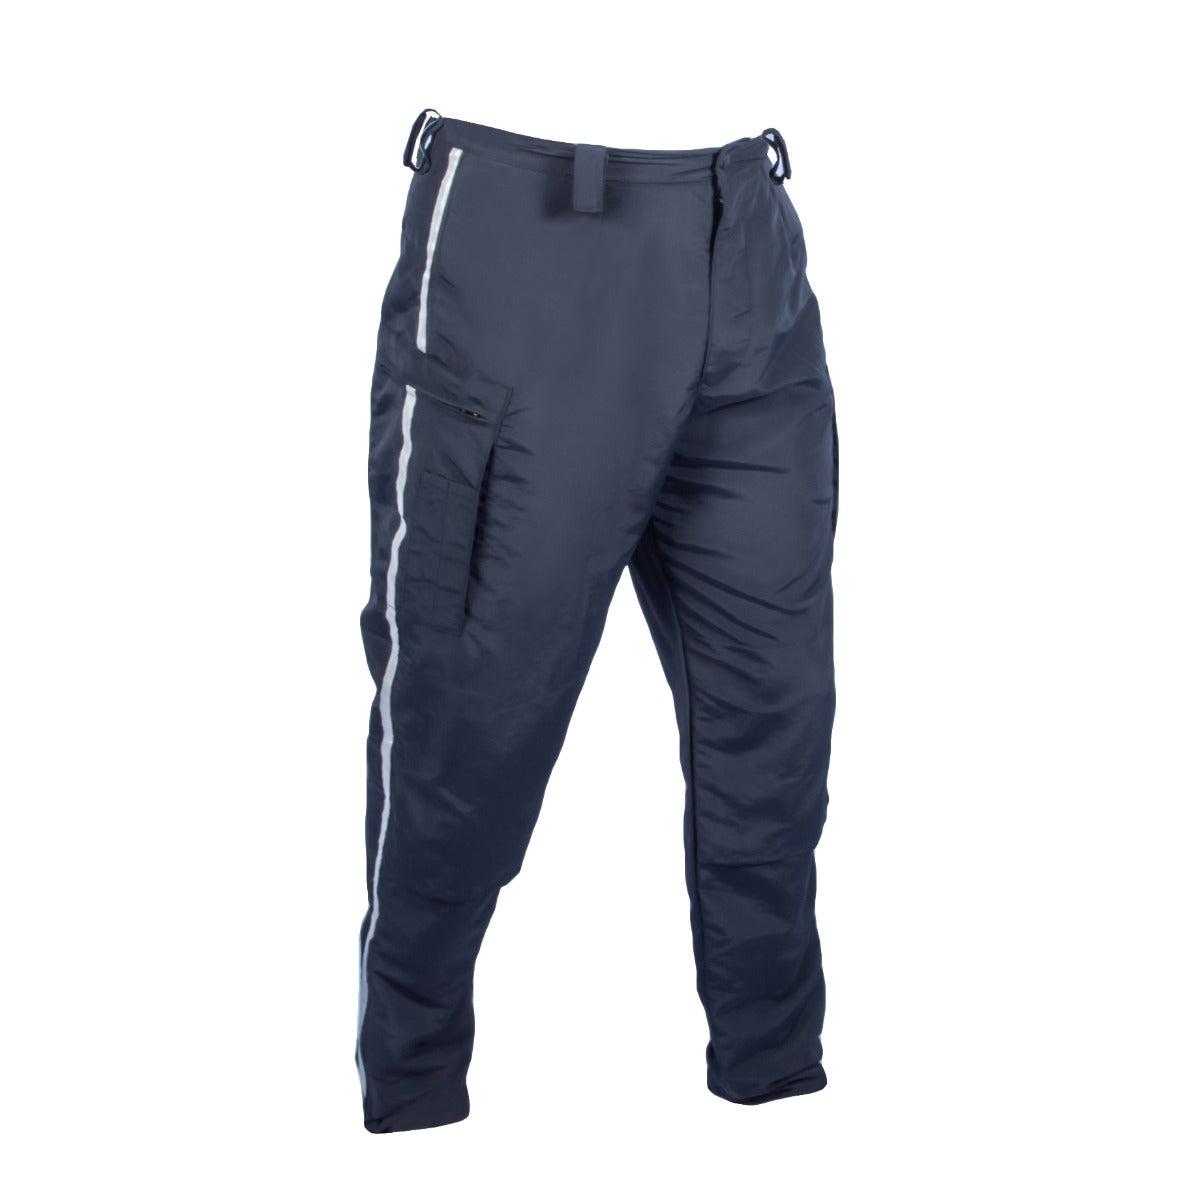 IetpShops GB - Black Cargo trousers Challenger Amiri - The Pro High-Waisted  Cycling Shorts are ideal for